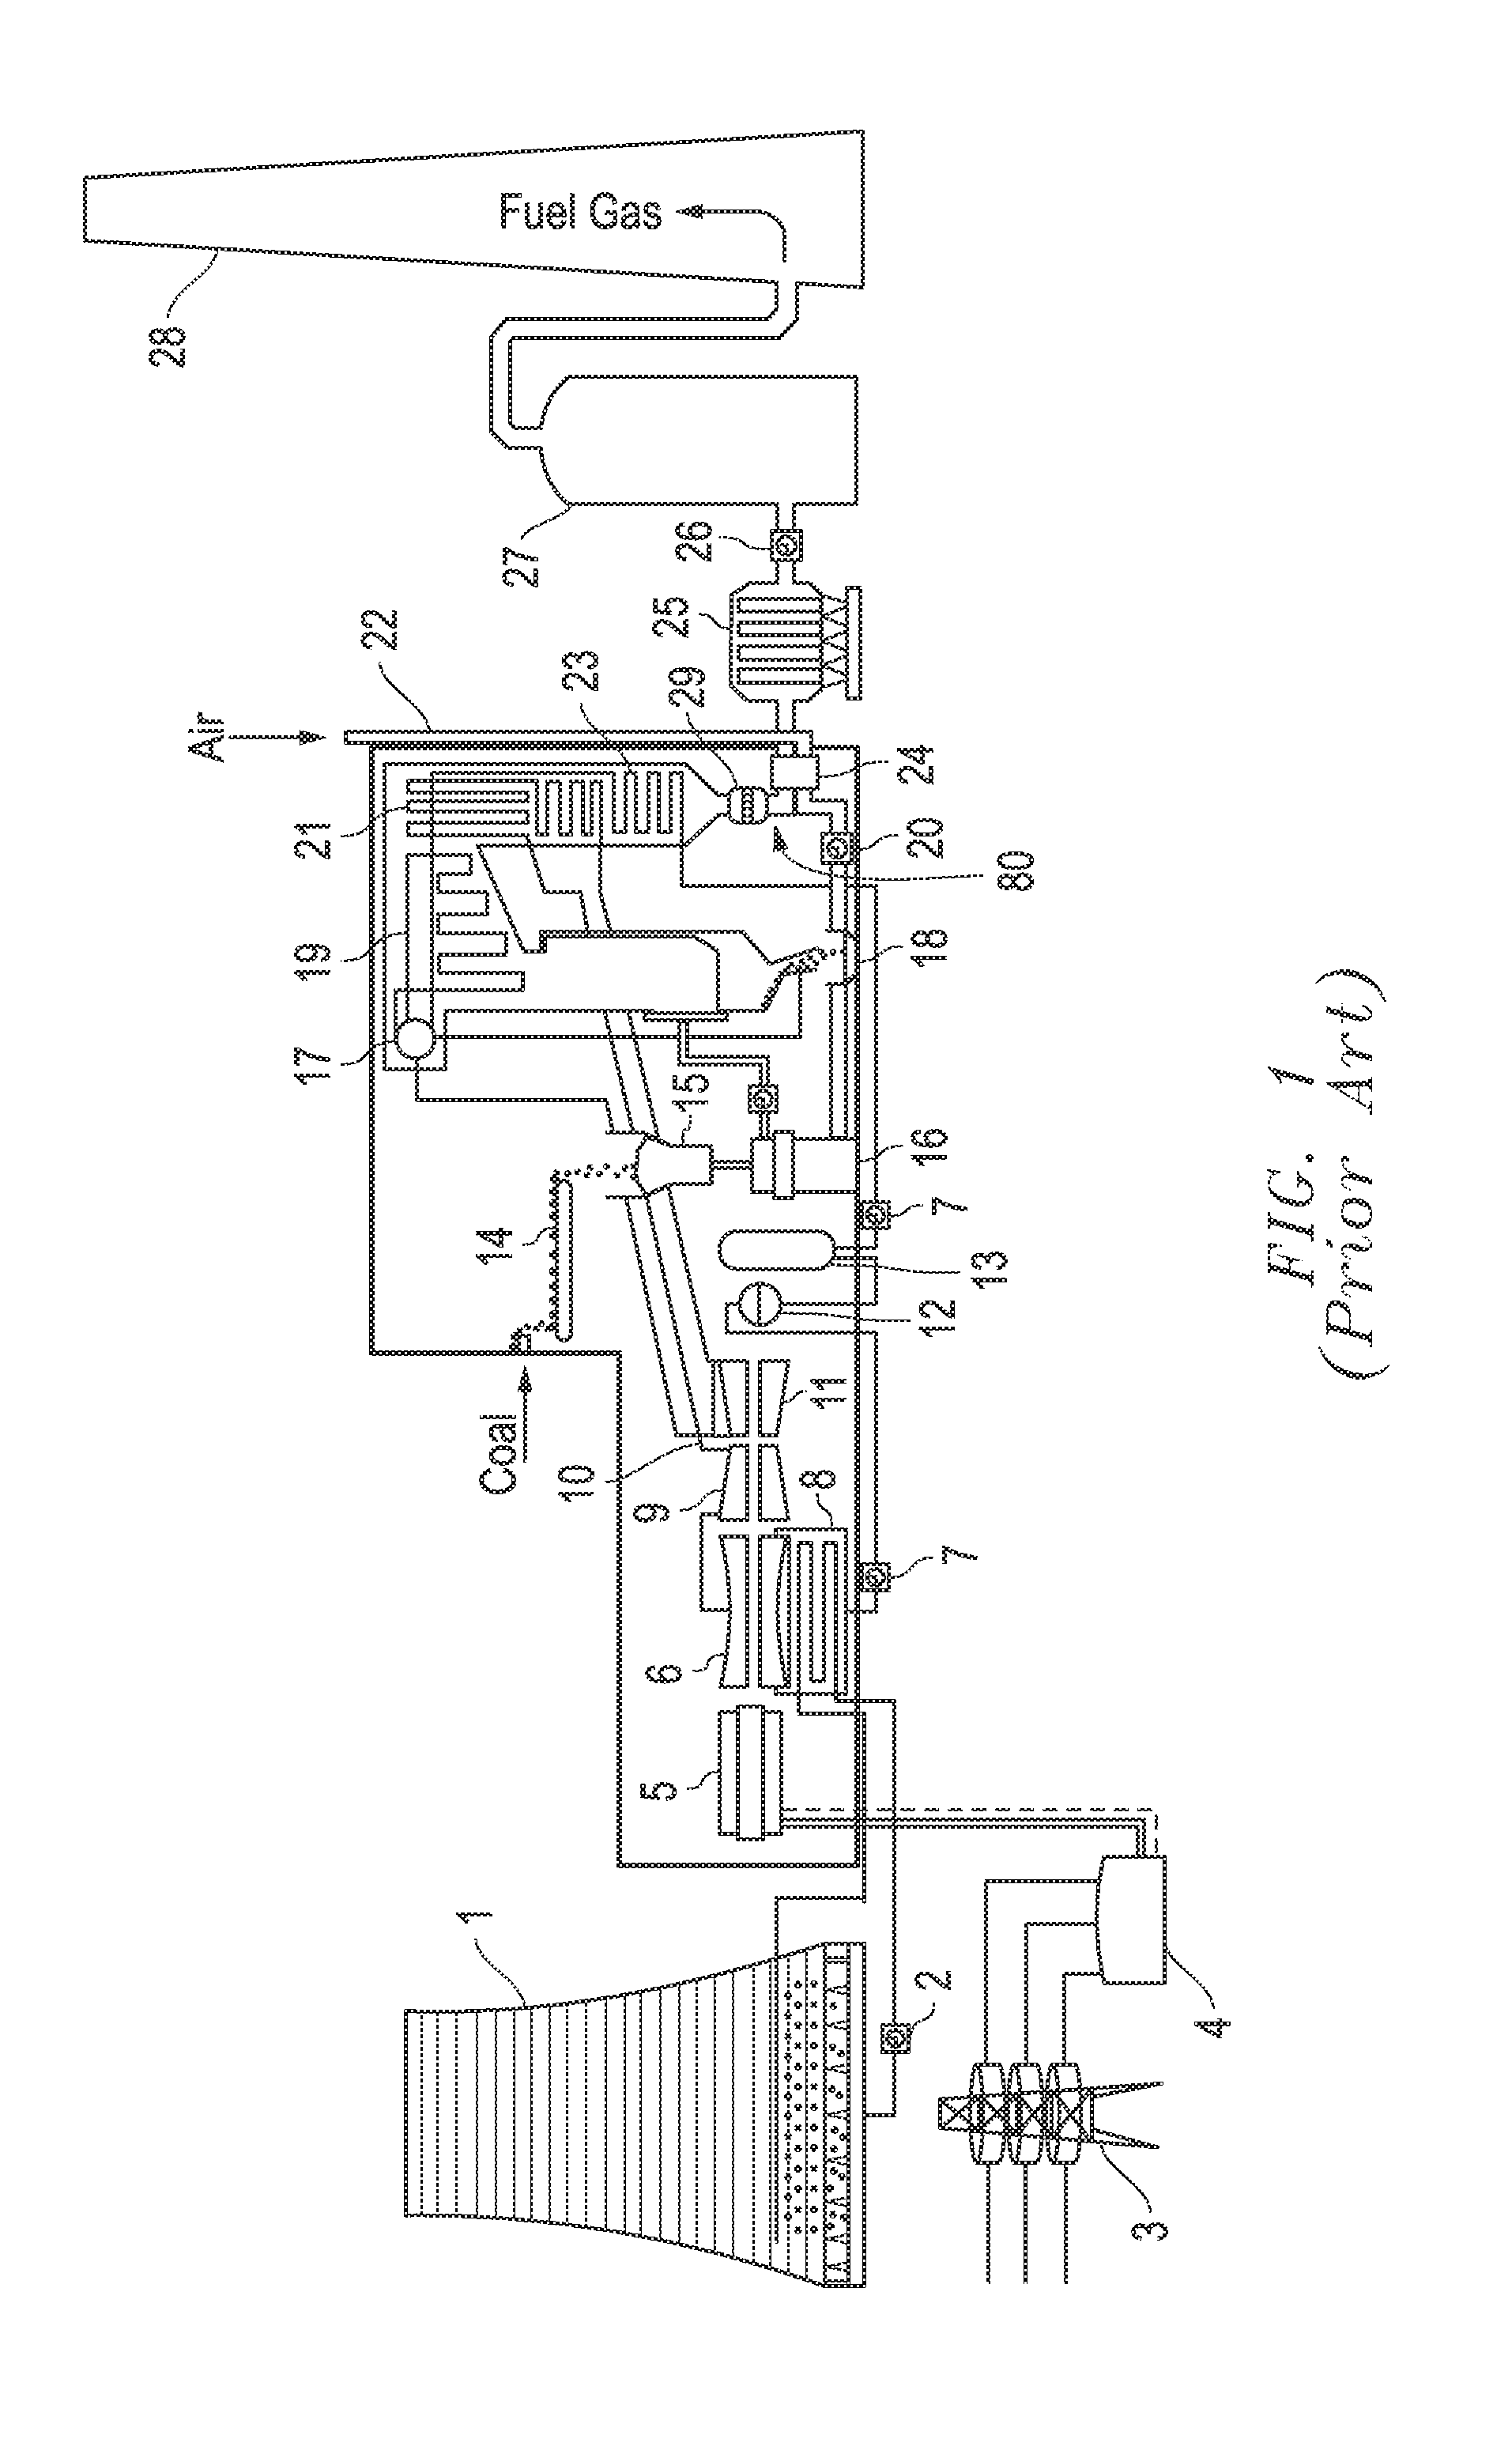 Method and system for removal of mercury from a flue gas